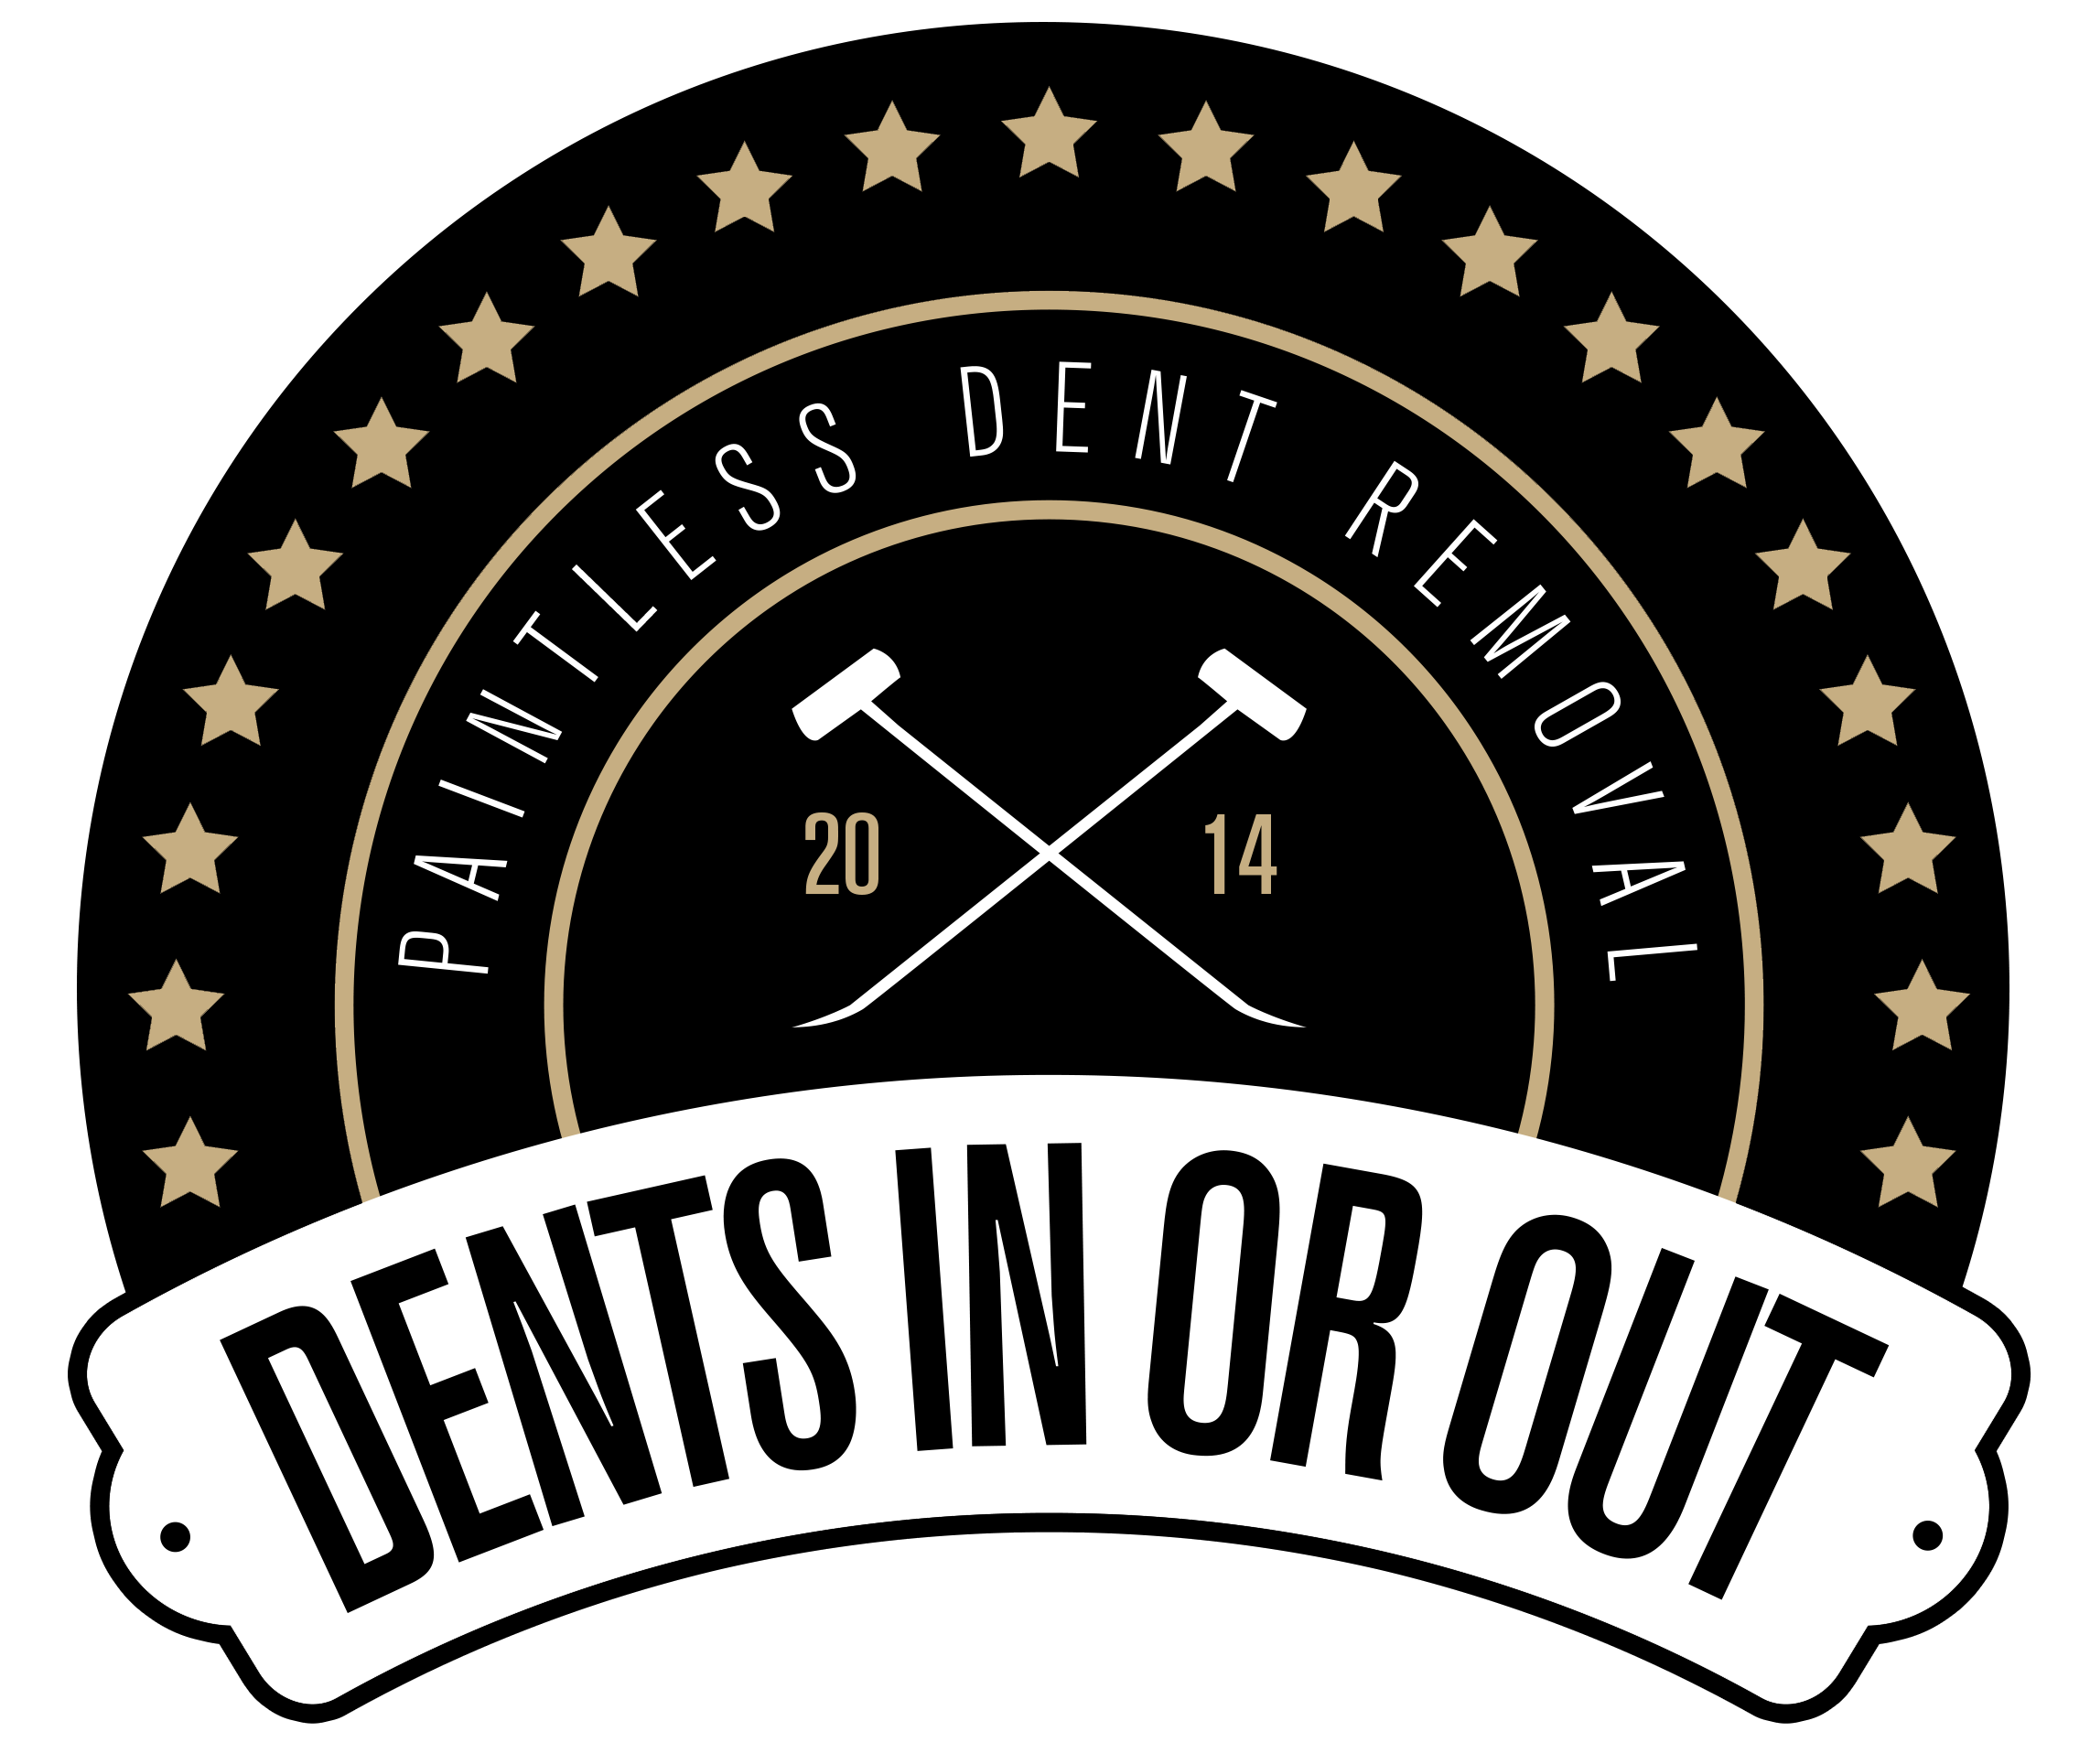 Dents In Or Out LLC